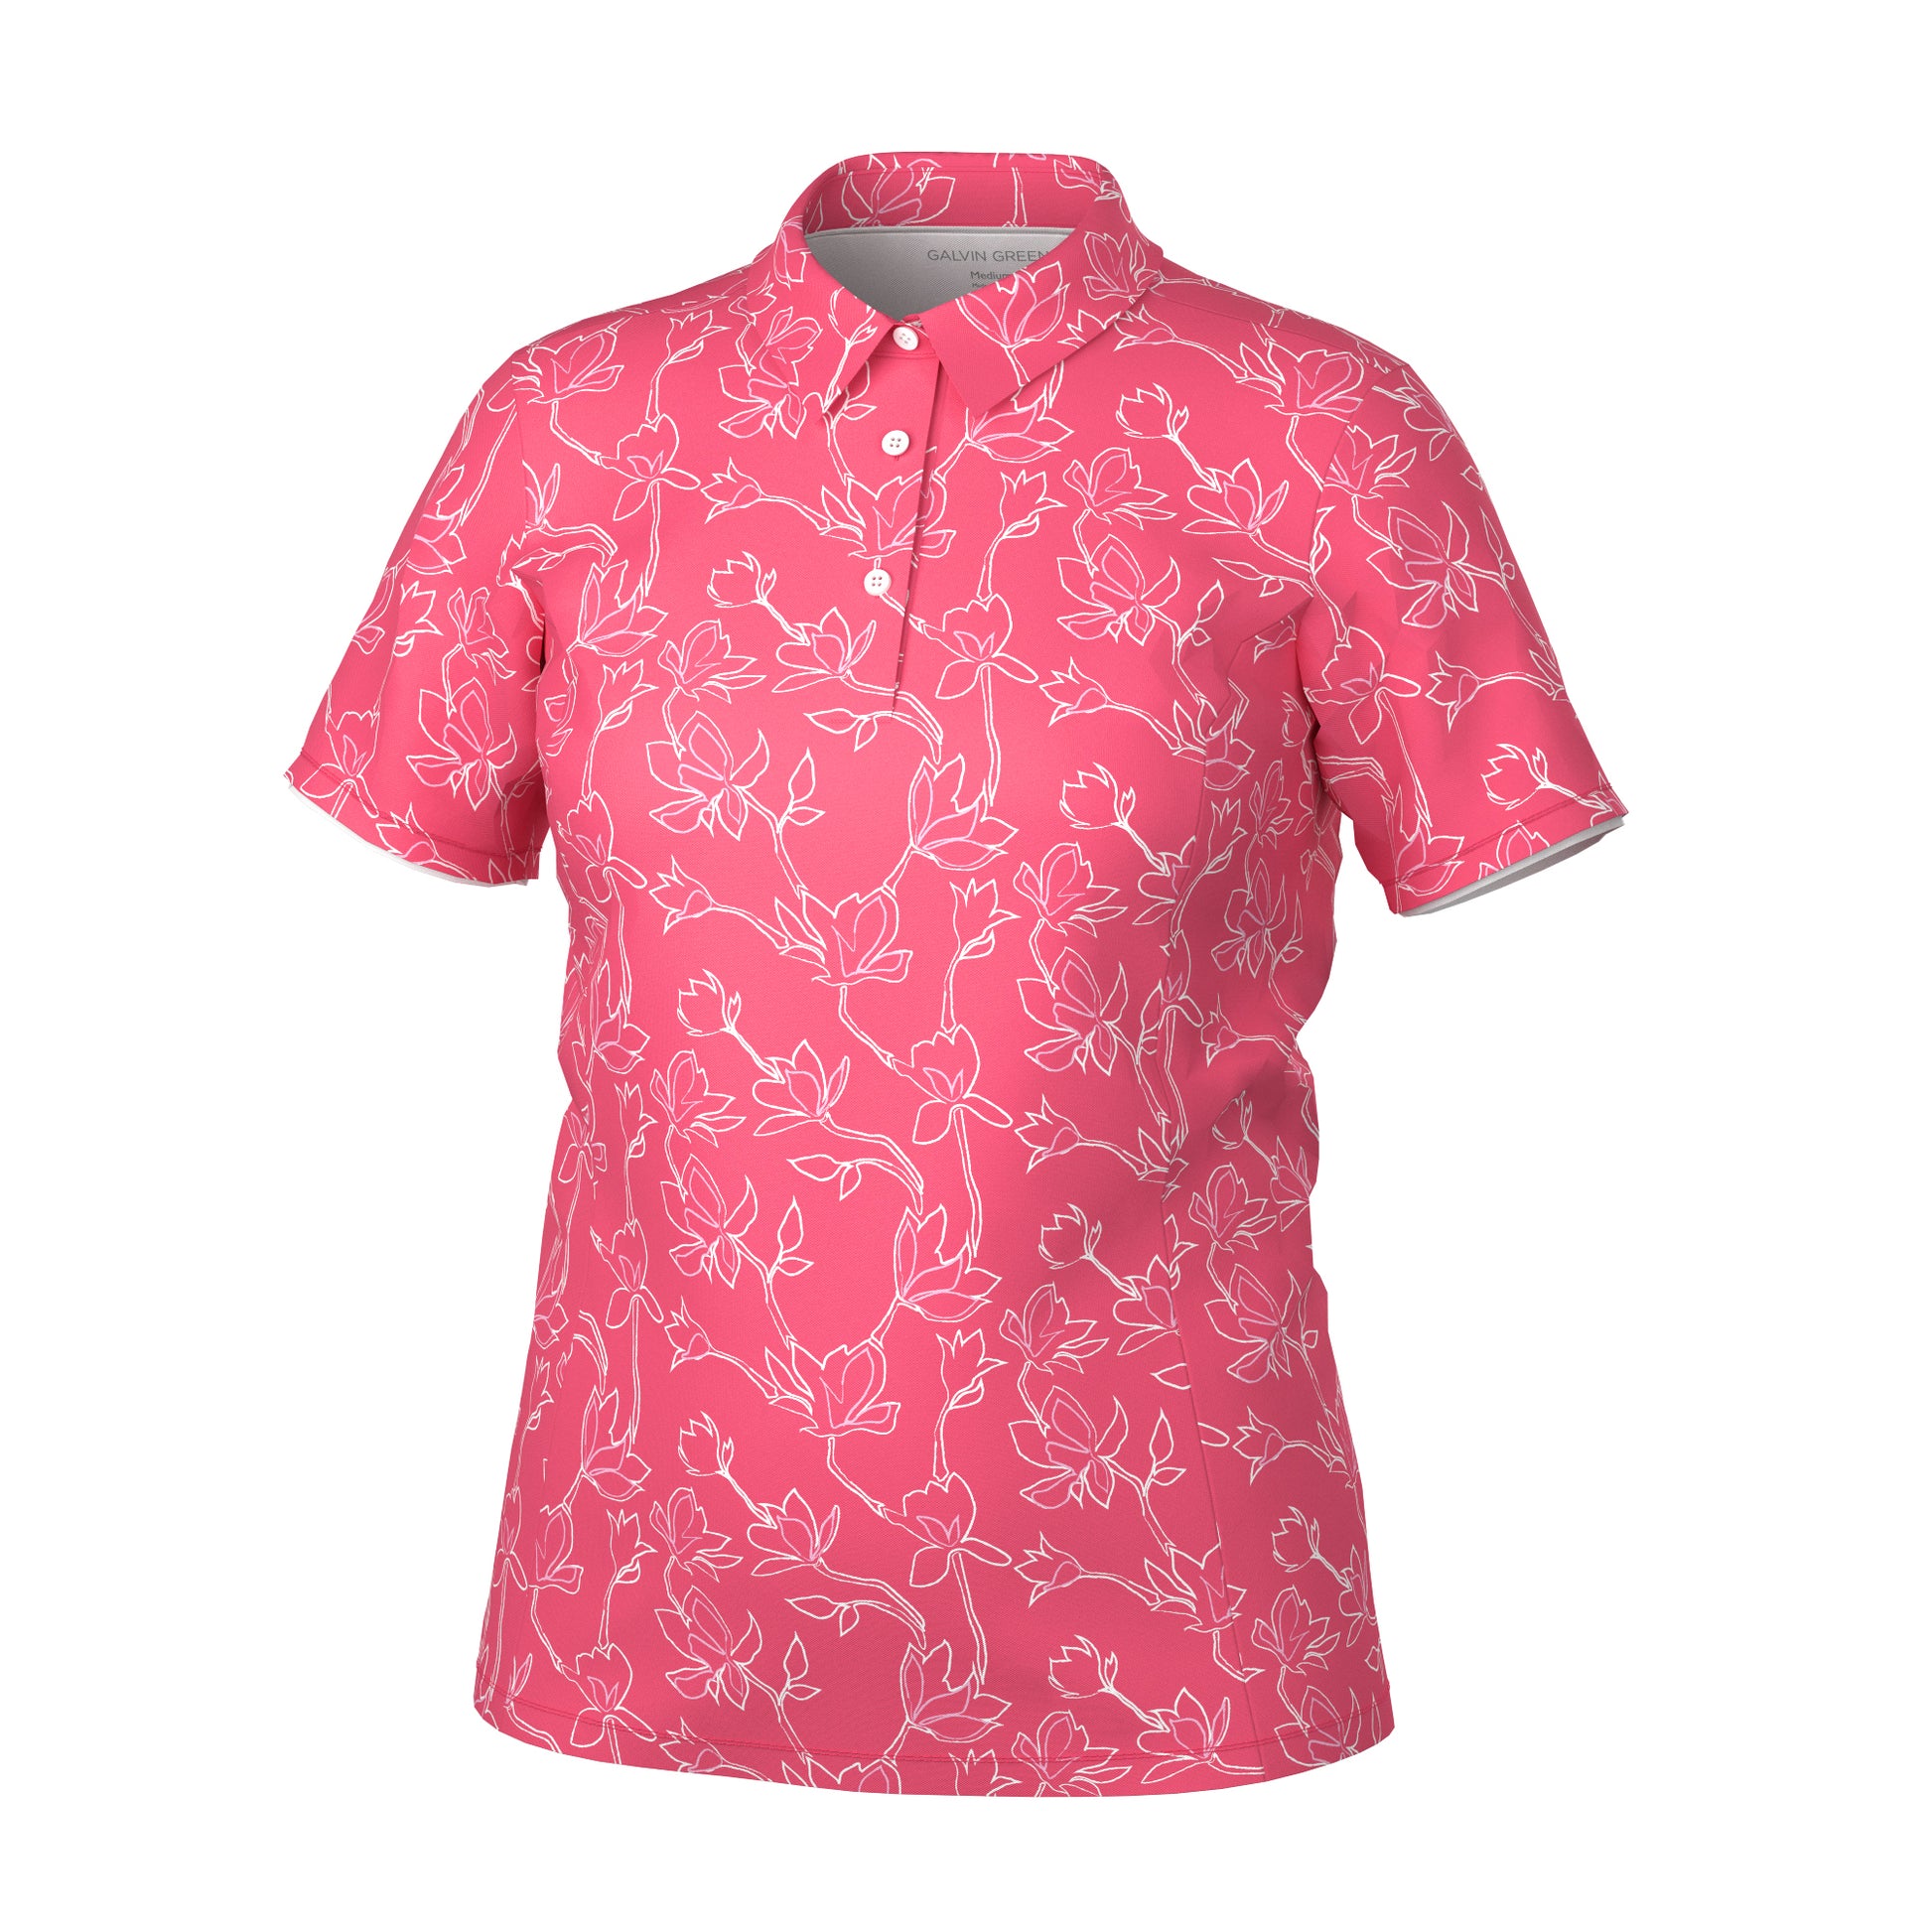 Galvin Green Ladies VENTIL8 PLUS Short Sleeve Polo with Floral Print  in Camelia Rose